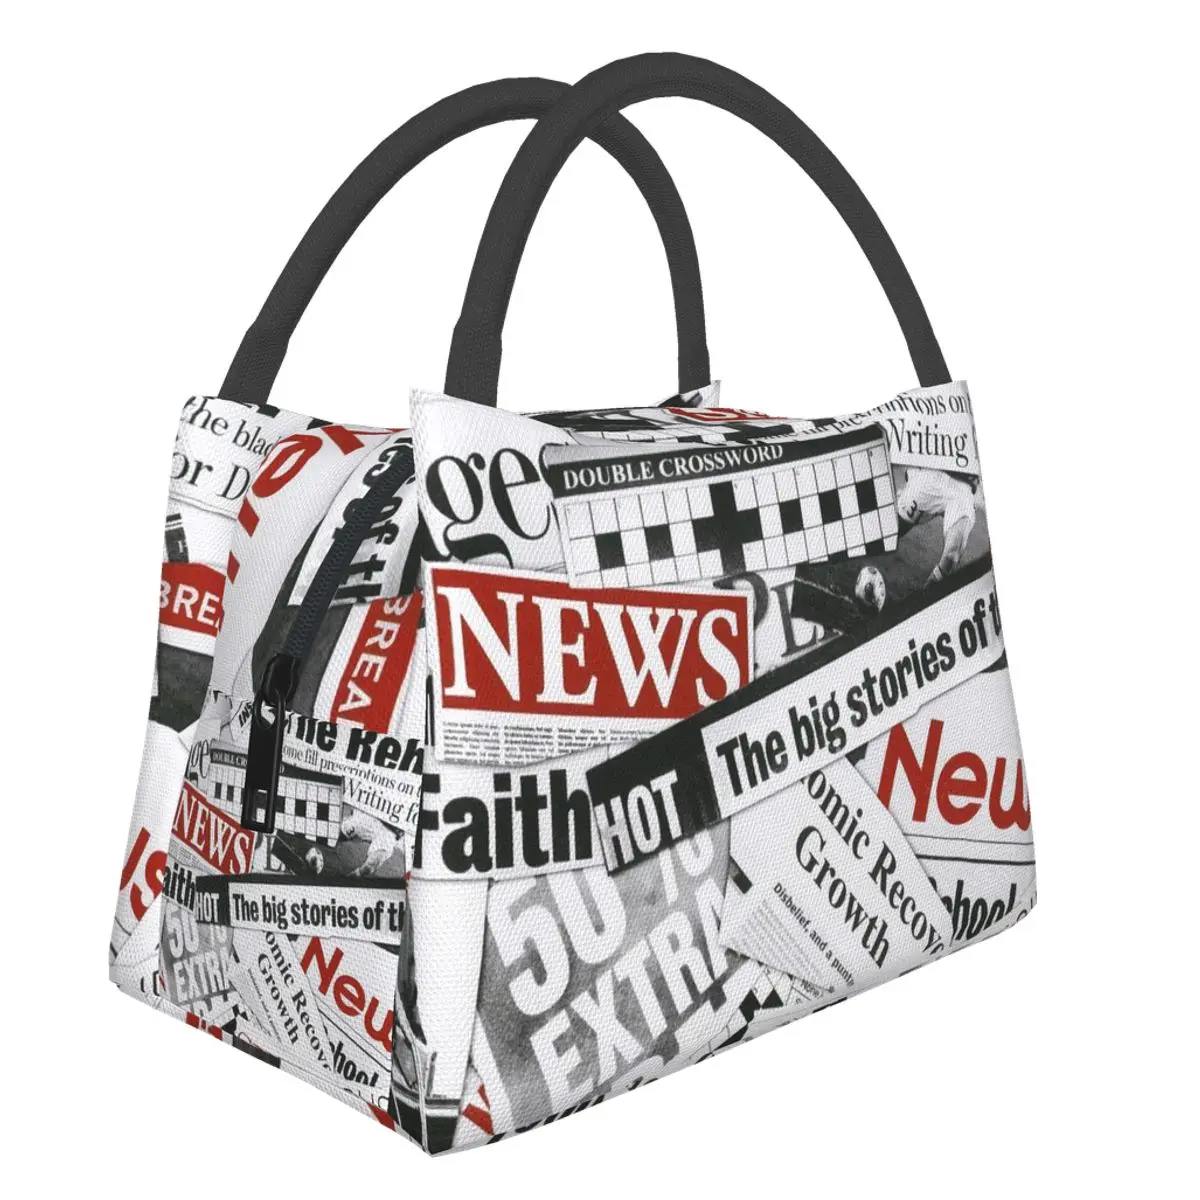 Portable Lunch Bag Newspaper Pattern Print Thermal Insulated Lunch Box Tote Cooler Handbag Bento Dinner Container School Storage thermal insulated lunch box bag tote cooler handbag bento pouch dinner container school food storage bags portable lunch bag